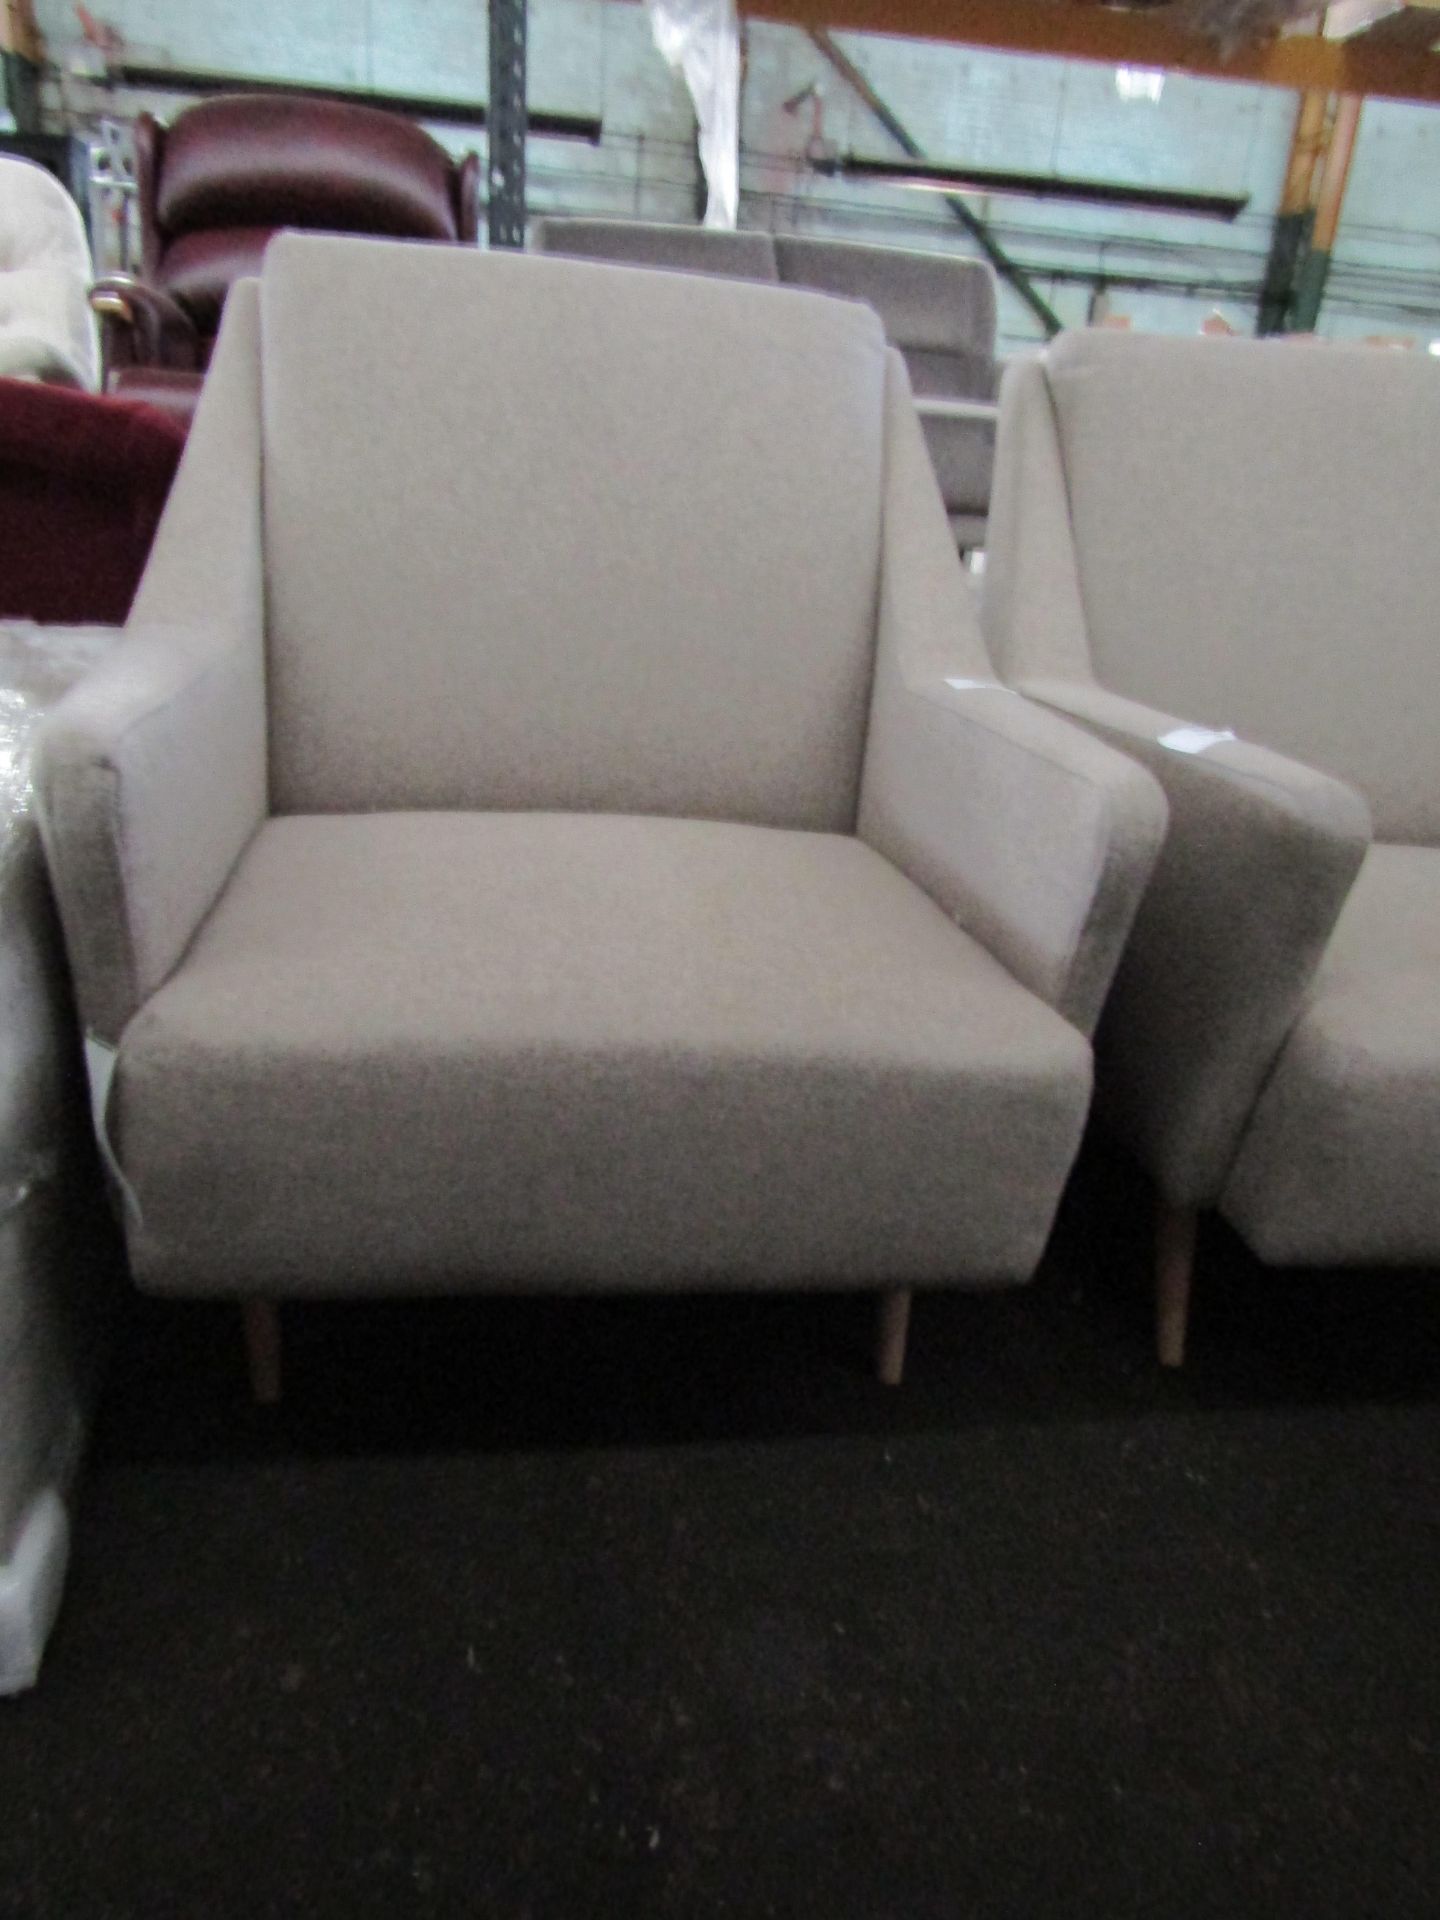 Swoon Rune Armchair in Light Grey Soft Wool RRP £479.00 comes with feet but they may not be the